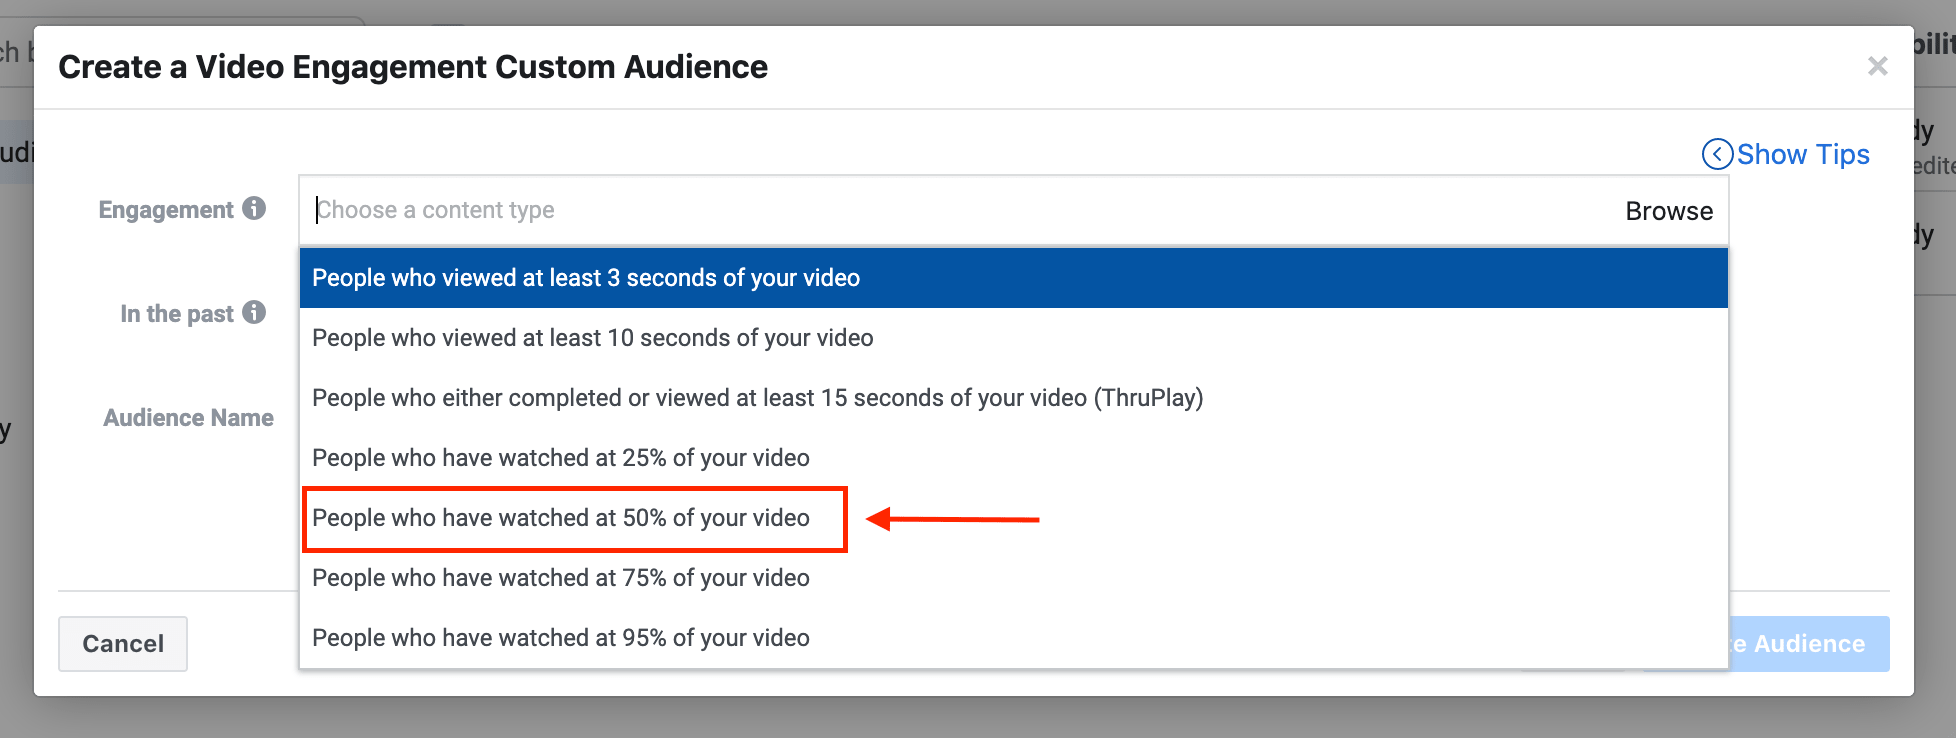 Screenshot showing how to create a custom audience in Facebook based on video views.